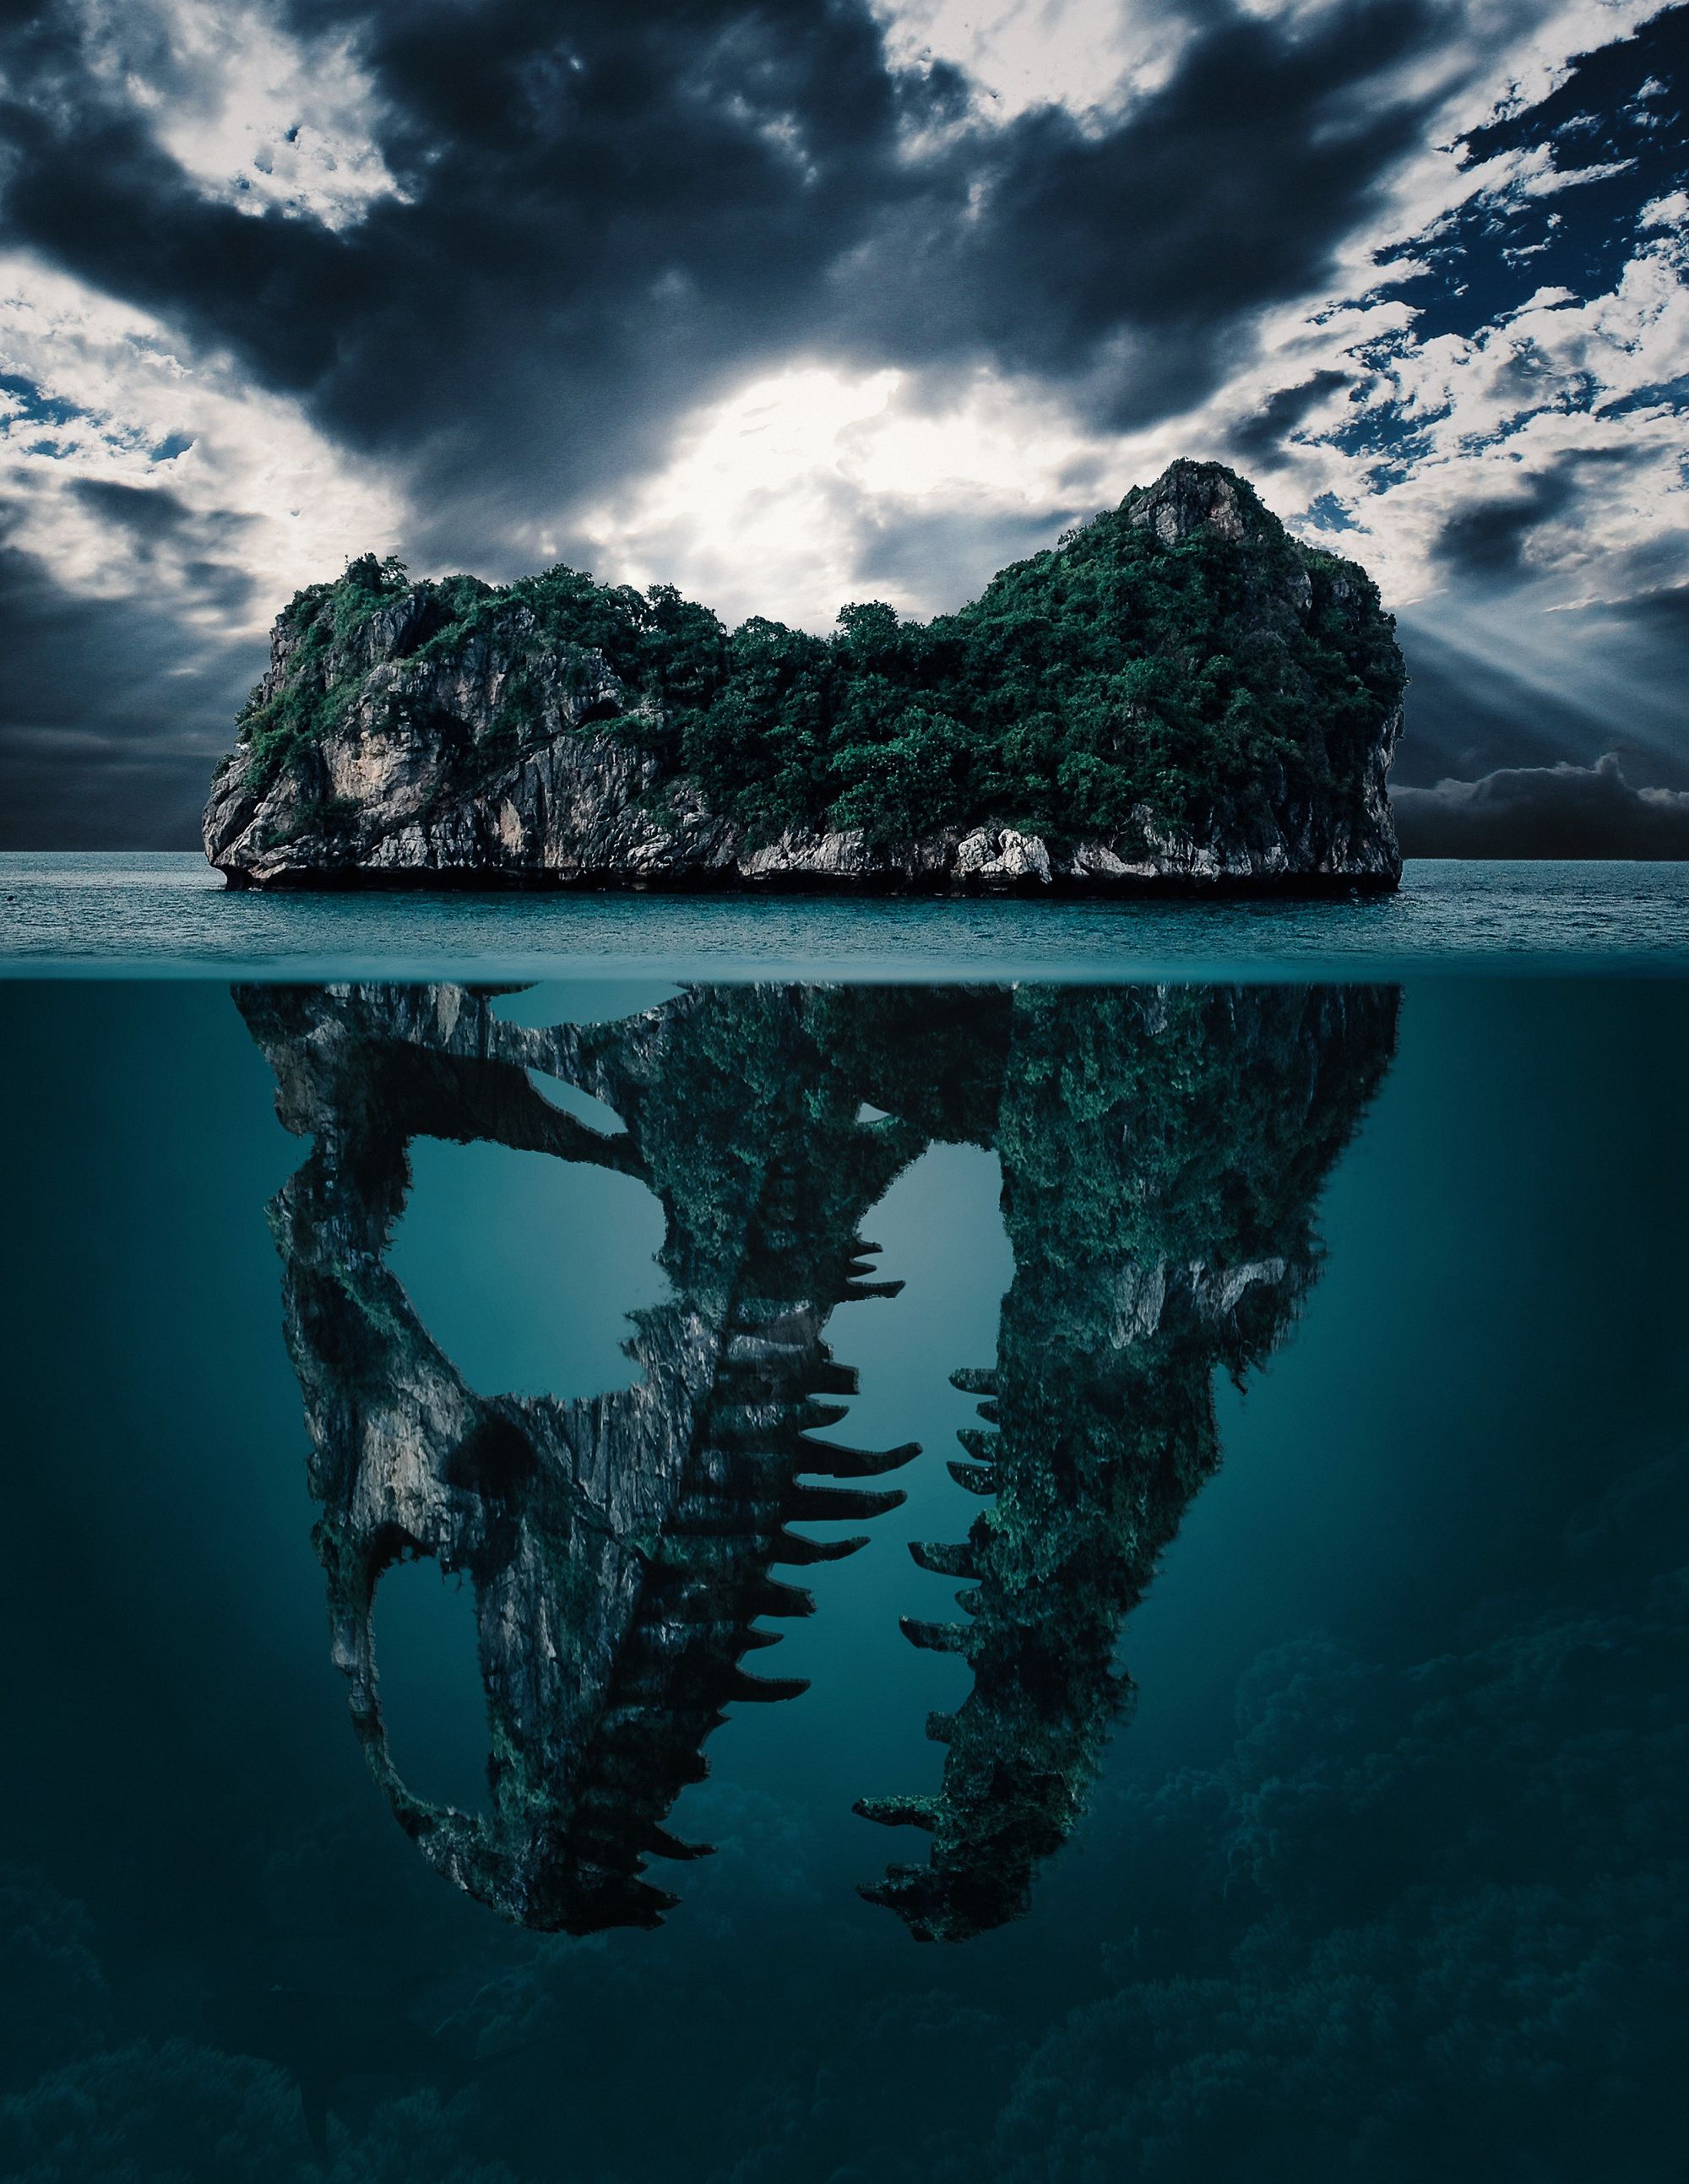 A picture of a mysterious horror island